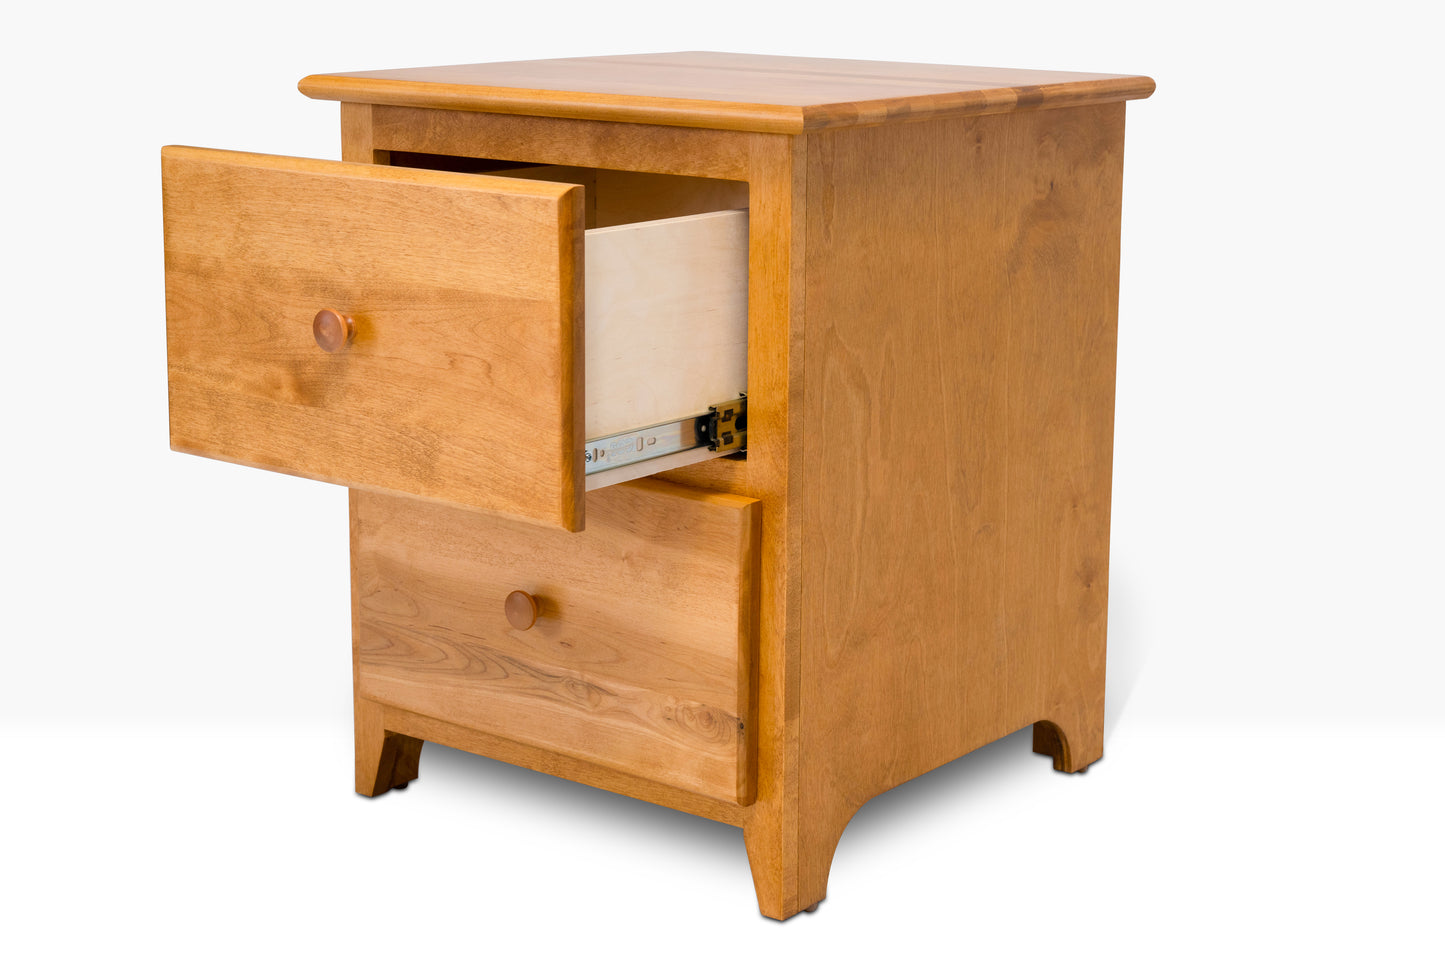 Acadia Shaker Two Drawer Nightstand is built from birch and features two drawers. Pictured in Autumn Gold finish with drawer open to show extension.